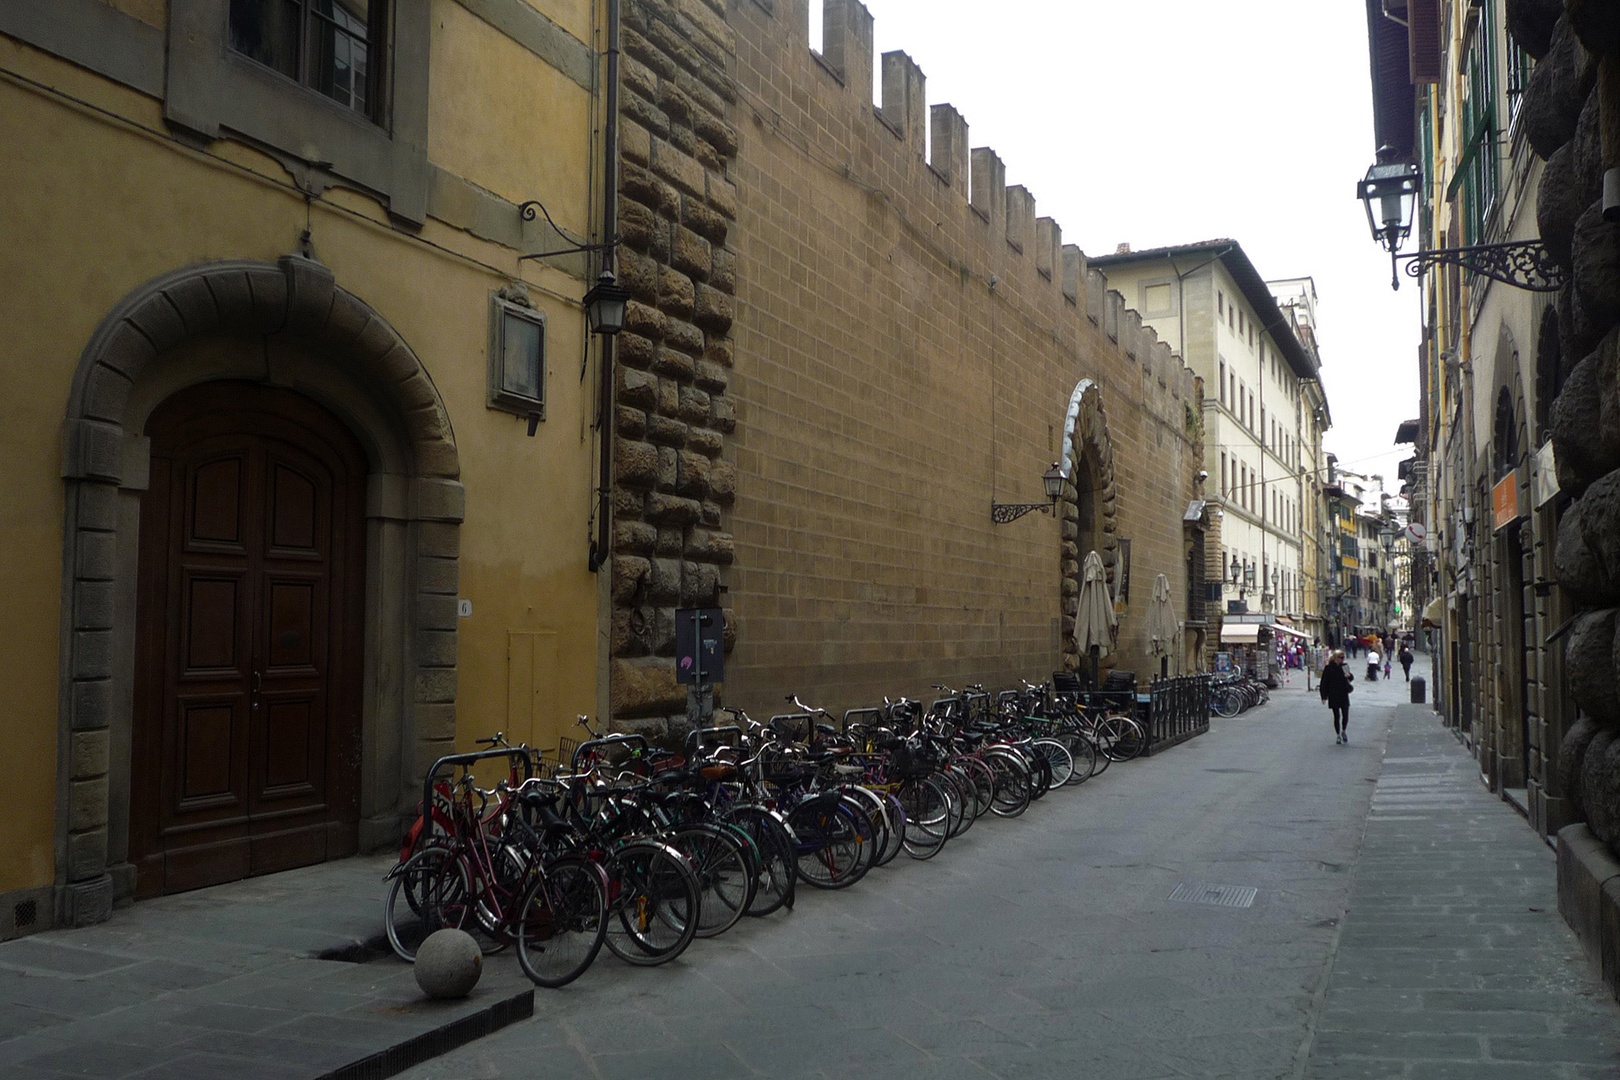 This is the facade of the Riccardi Library built in the 1600's on Via dei Ginori.